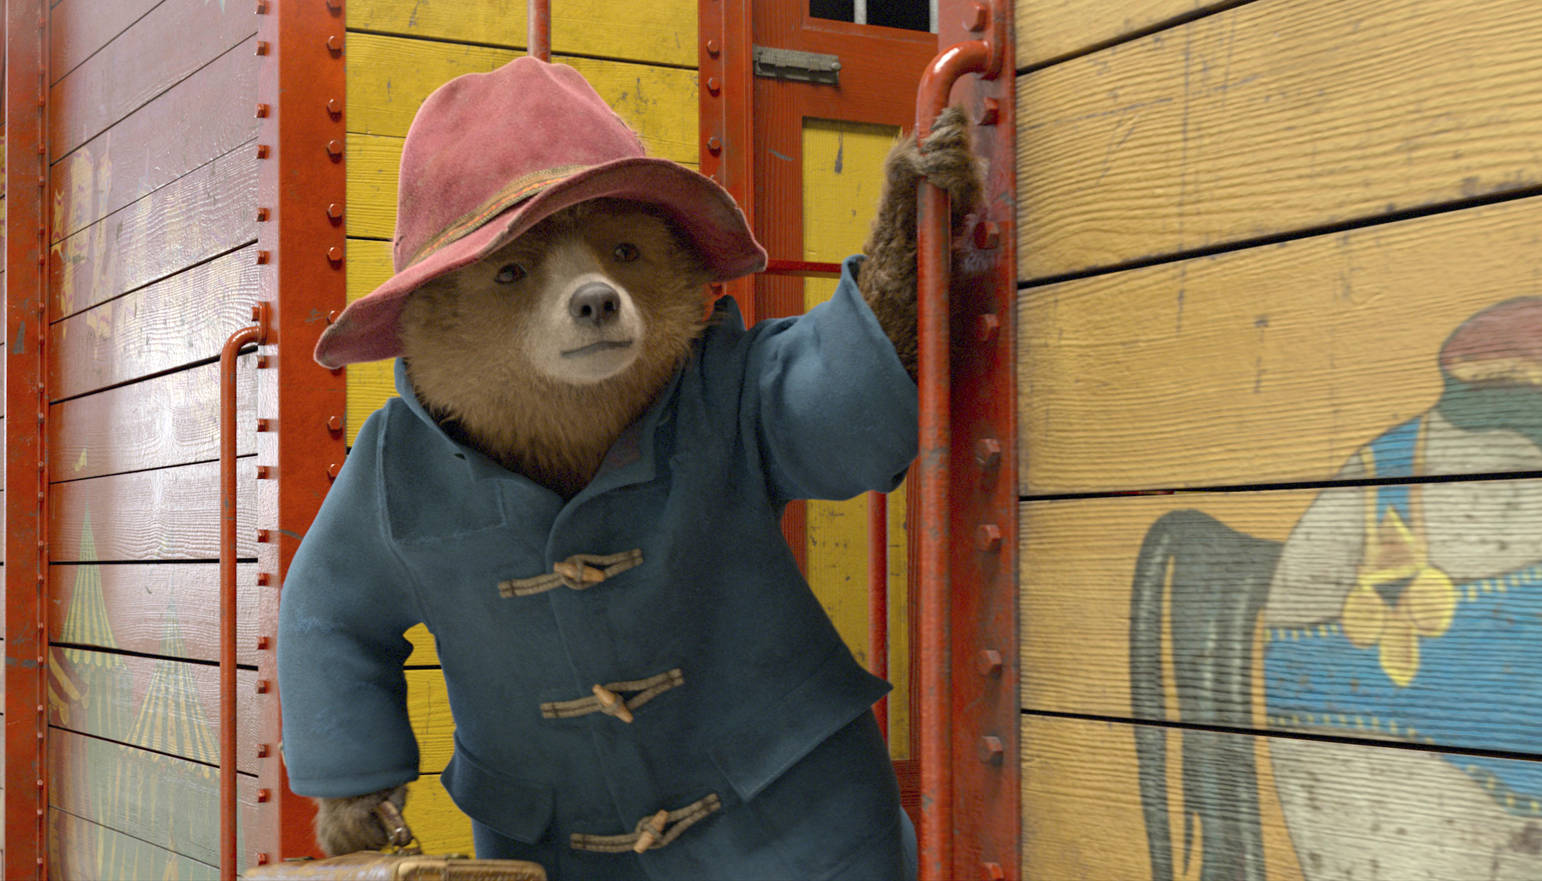 This image released by Warner Bros. Pictures shows the character Paddington, voiced by Ben Whishaw, in a scene from “Paddington 2.” (Warner Bros. Pictures via AP)